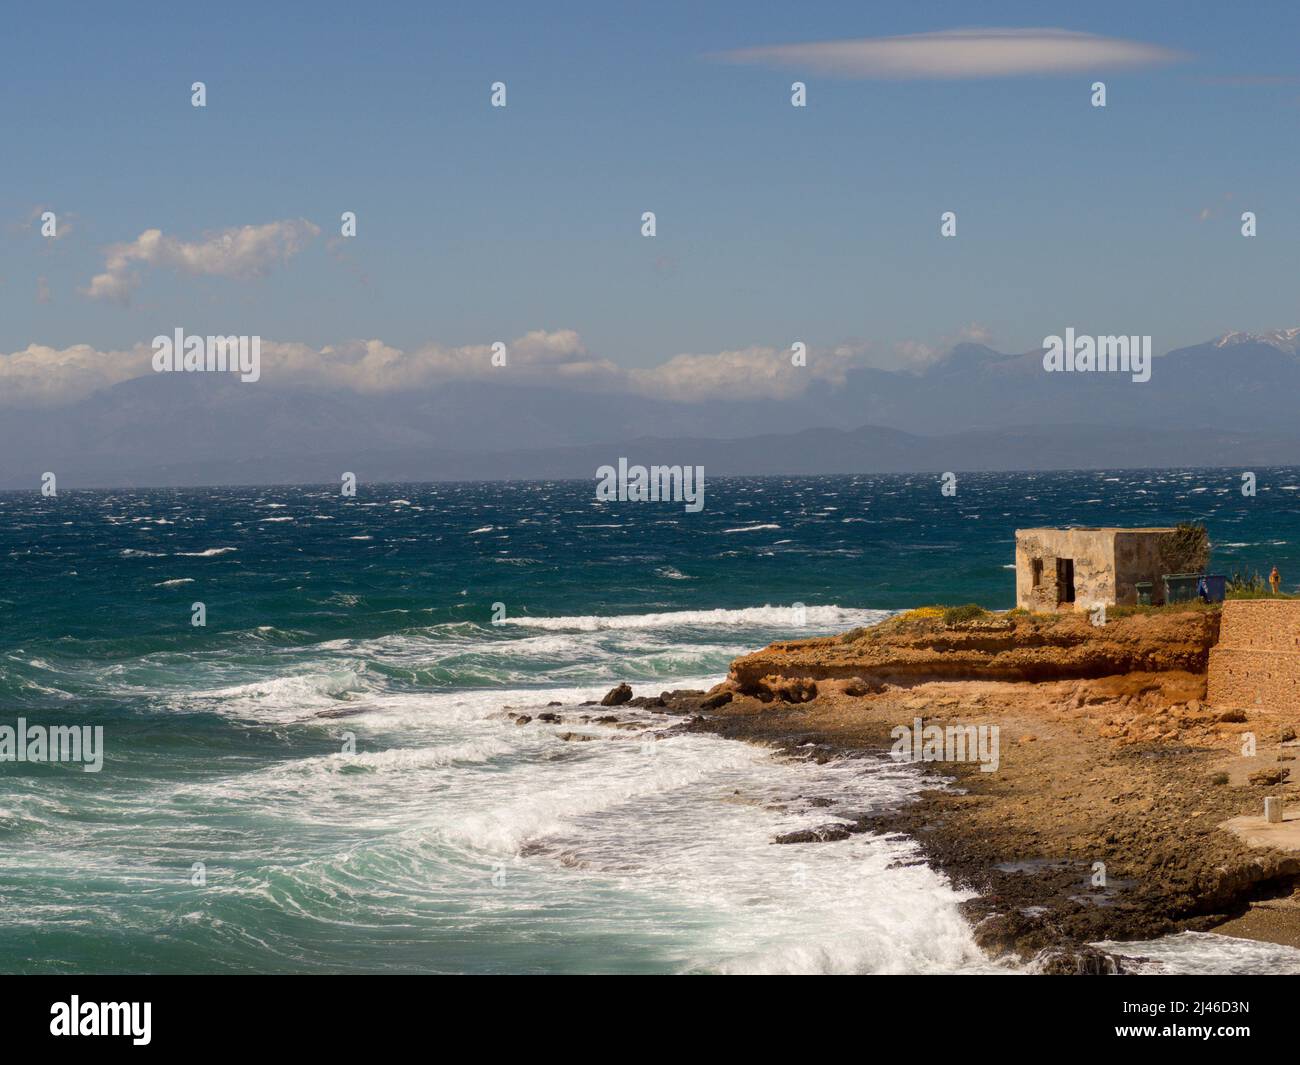 Abandoned house by the sea during a windy day Stock Photo